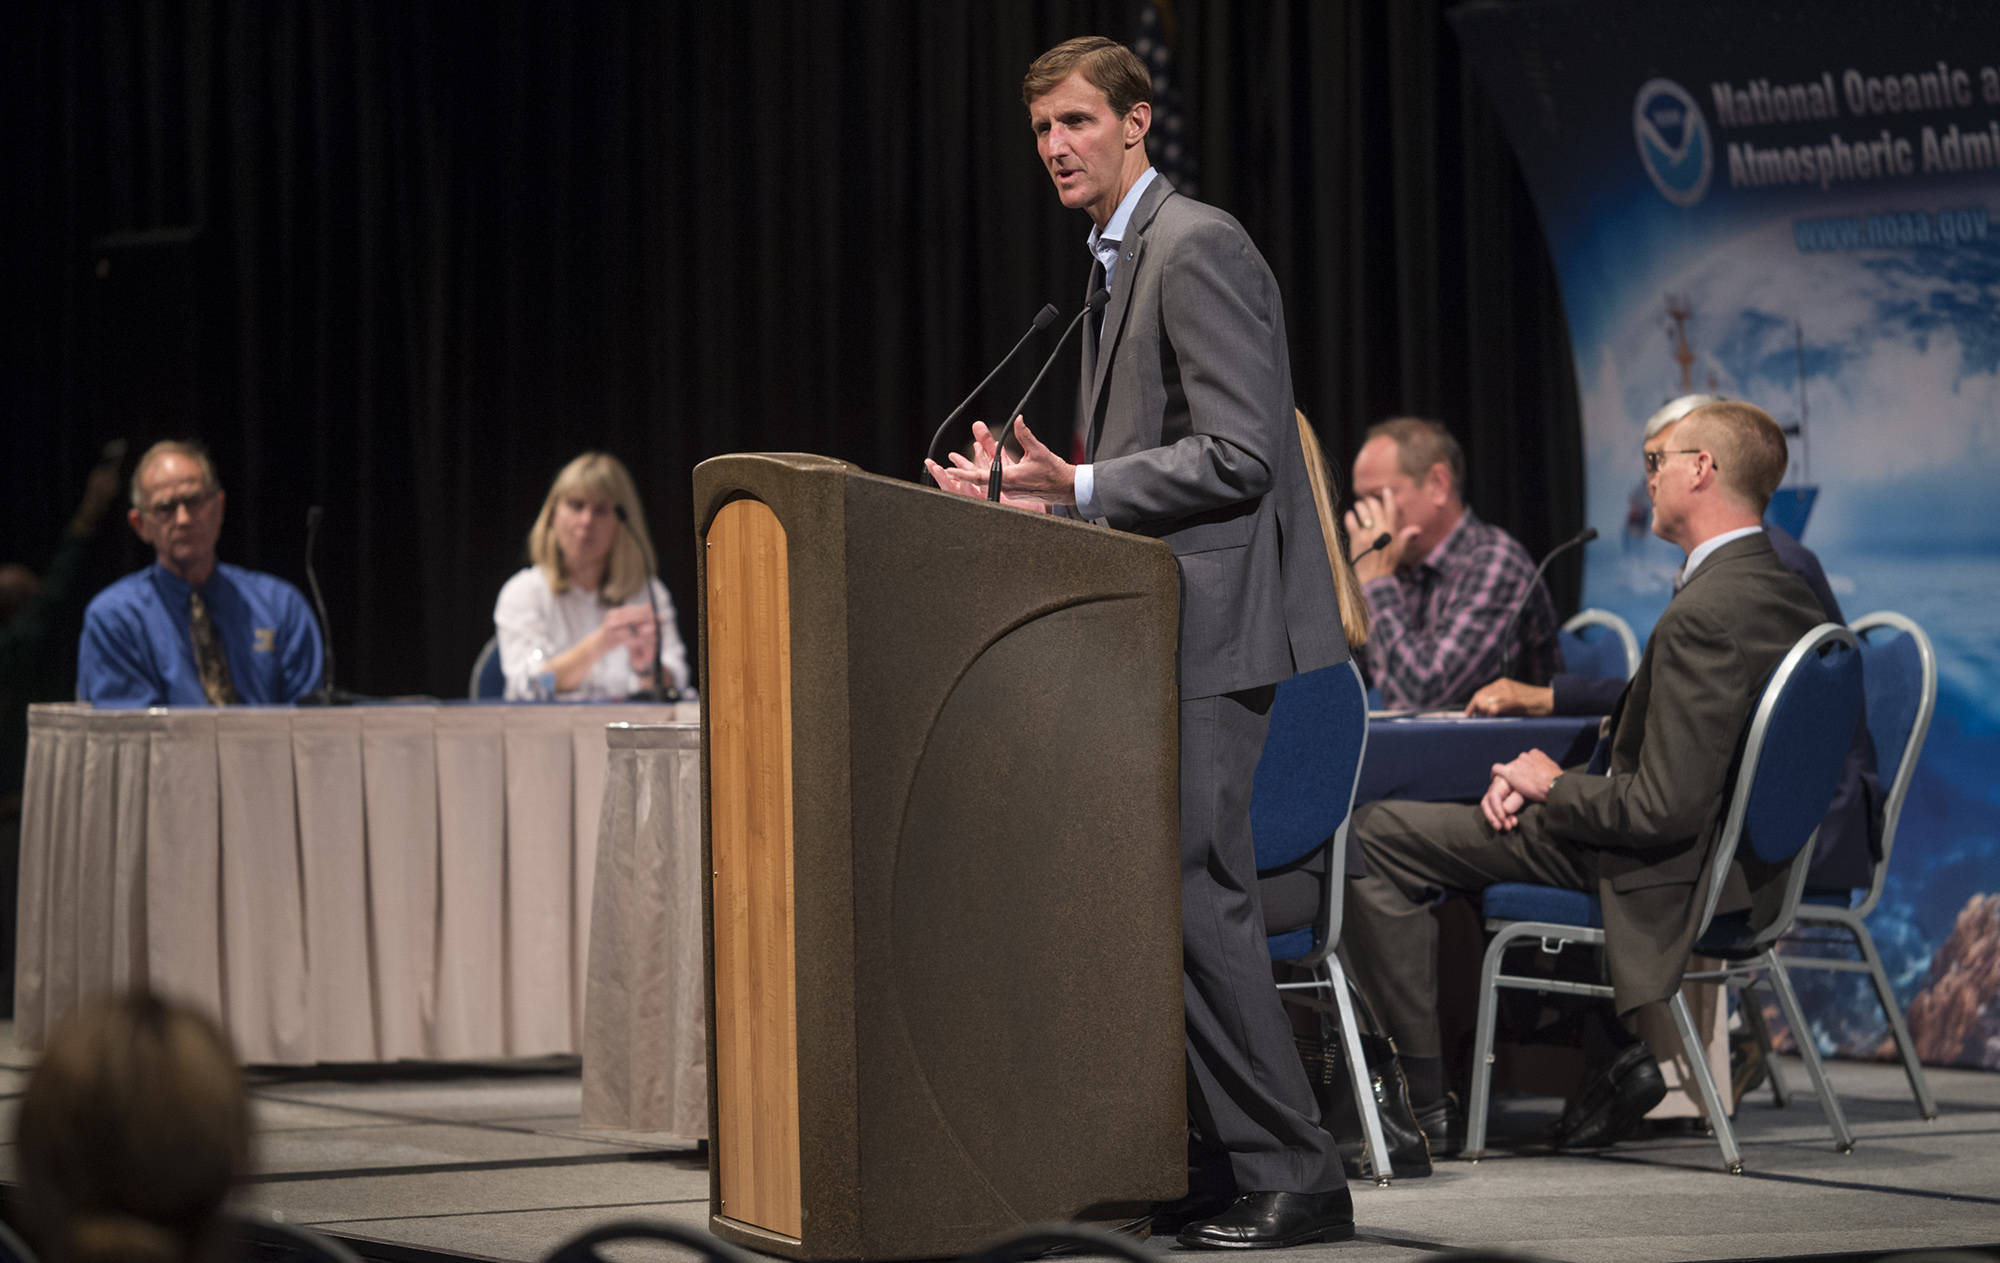 Timothy Cole Gallaudet, retired Rear Admiral in the United States Navy currently serving as the Assistant Secretary of Commerce for Oceans and Atmosphere within the U.S. Department of Commerce, speaks before a town hall event sponsored by NOAA at Centennial Hall on Friday, Aug. 31, 2018. (Michael Penn | Juneau Empire)